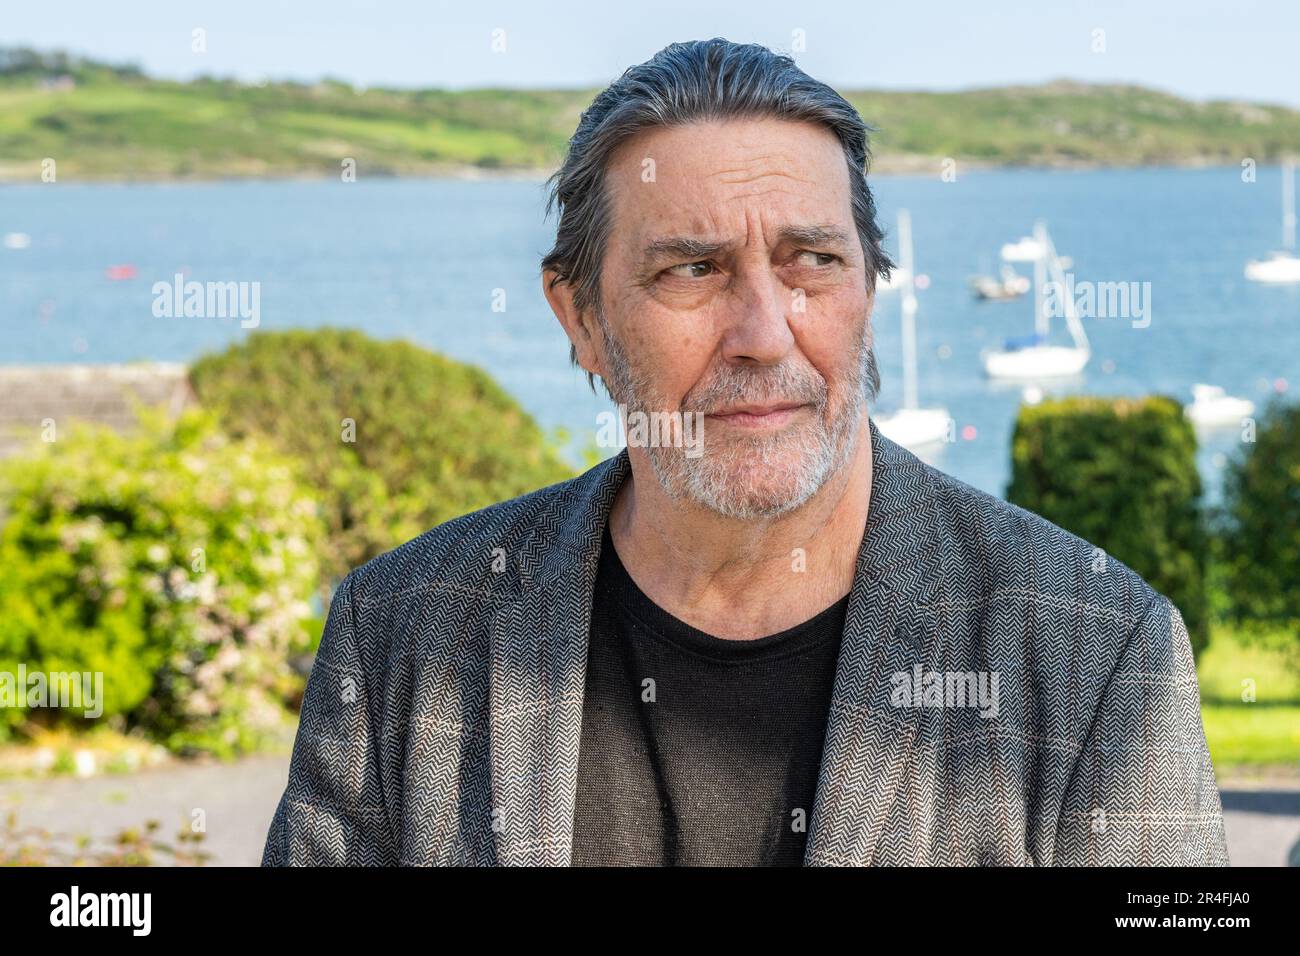 Schull, West Cork, Ireland. 27th May, 2023. Fastnet Film Festival  is taking place in Schull from 24th -28th May. At the festival on Saturday 27th May was actor Ciarán Hinds. Credit: AG News/Alamy Live News. Stock Photo